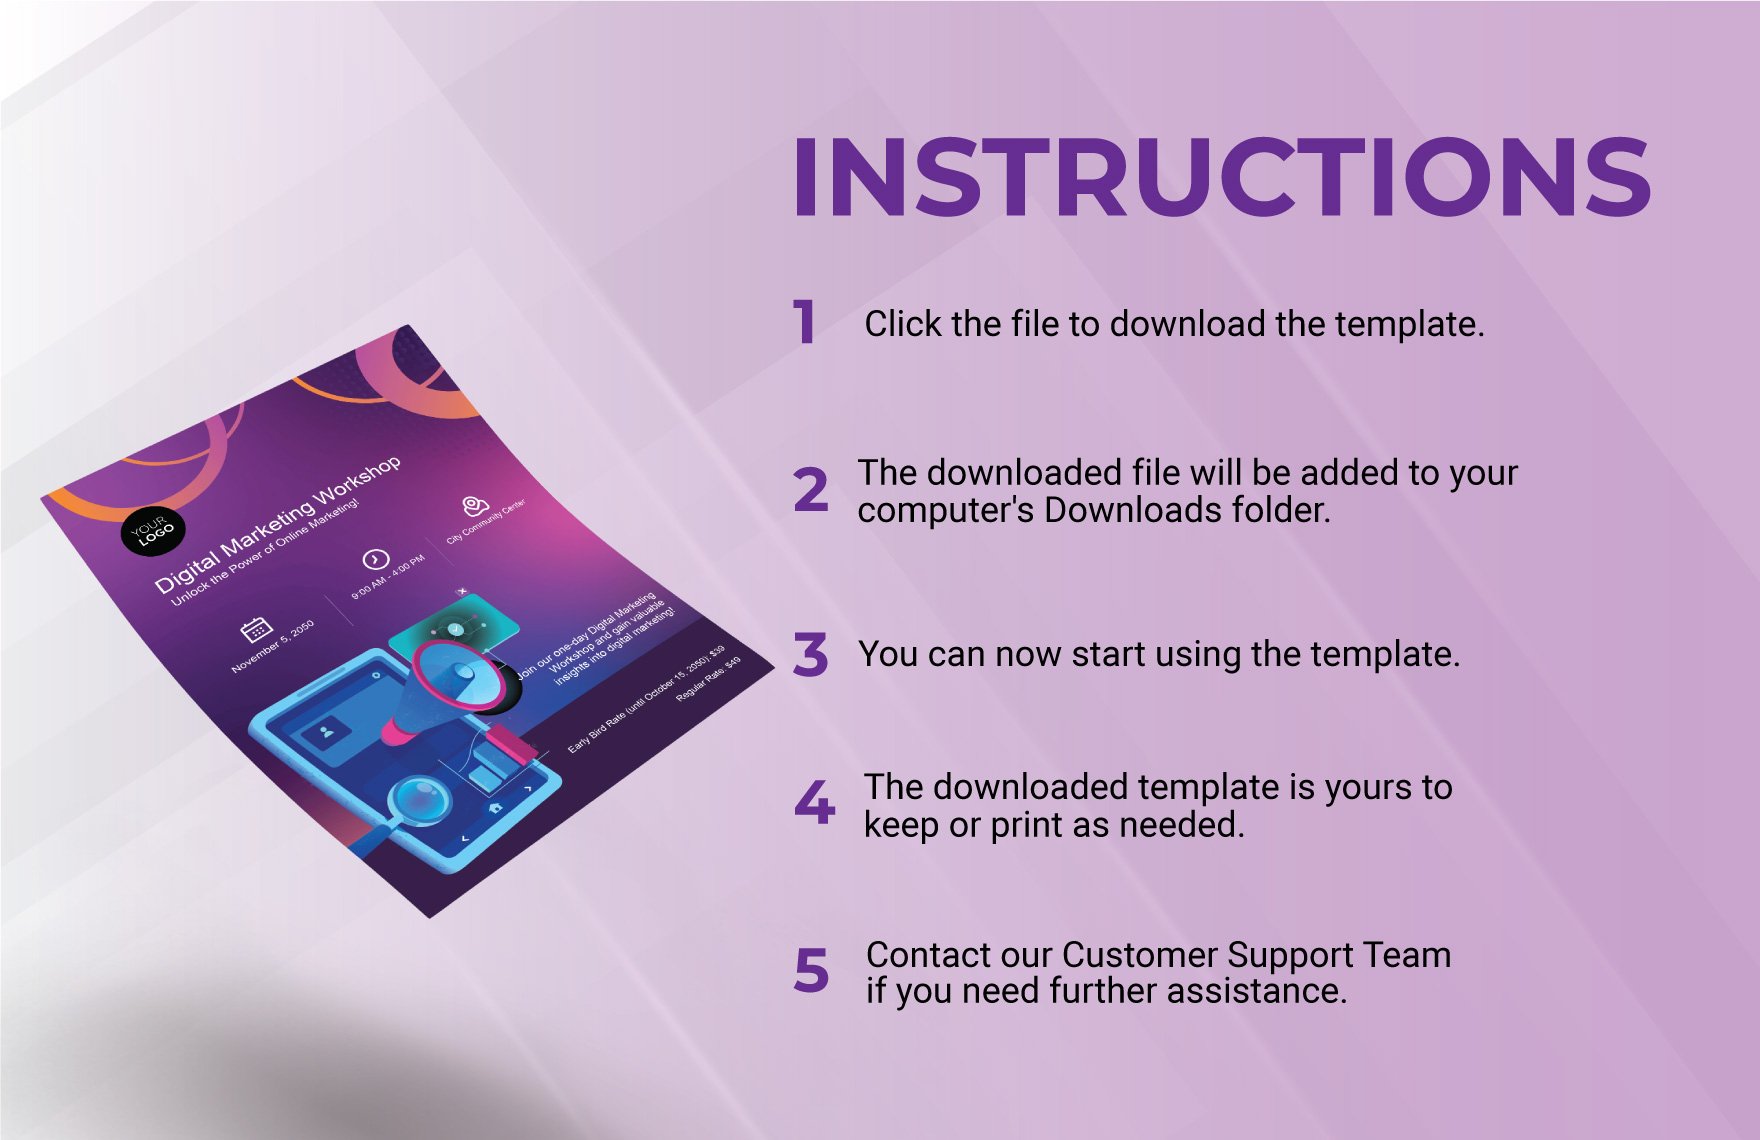 Education Flyer Template